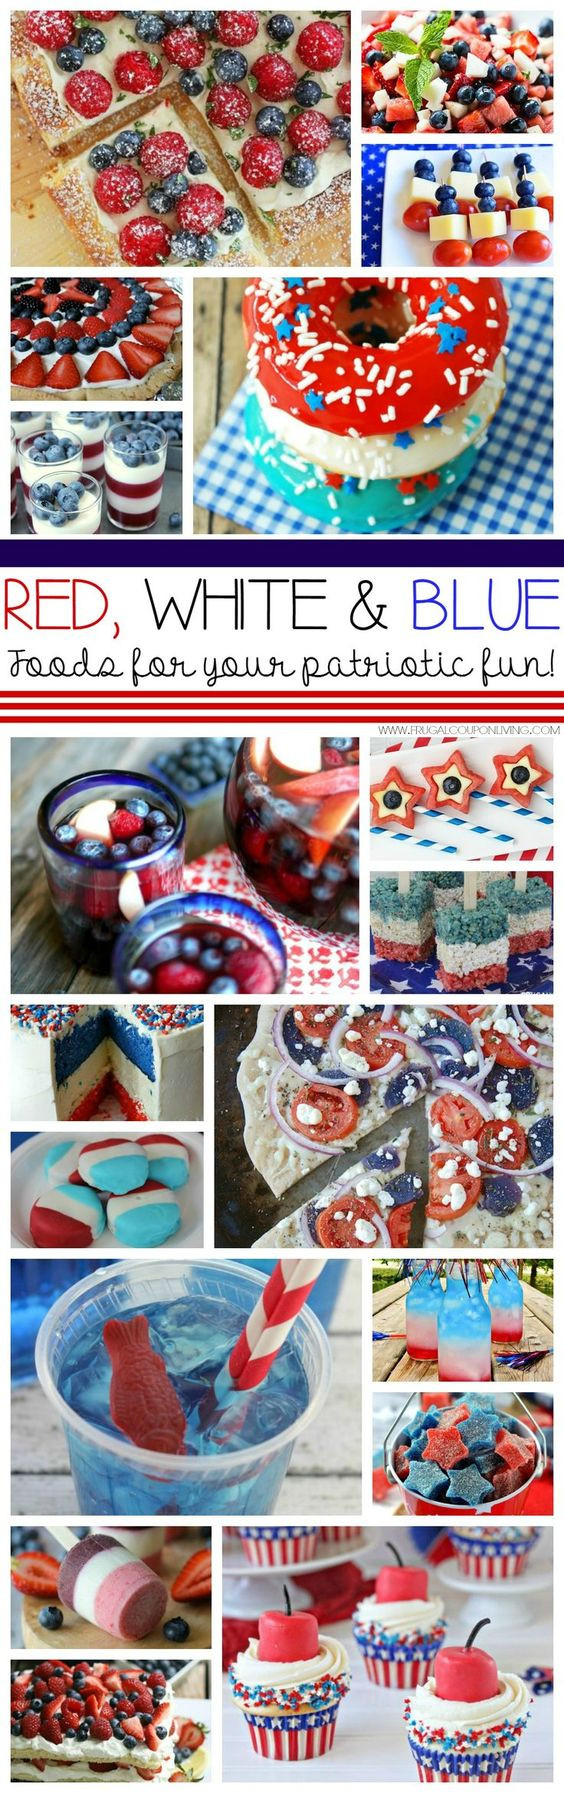 Red White And Blue Party Food Ideas
 Red White & Blue Foods Ideas for Your Gathering